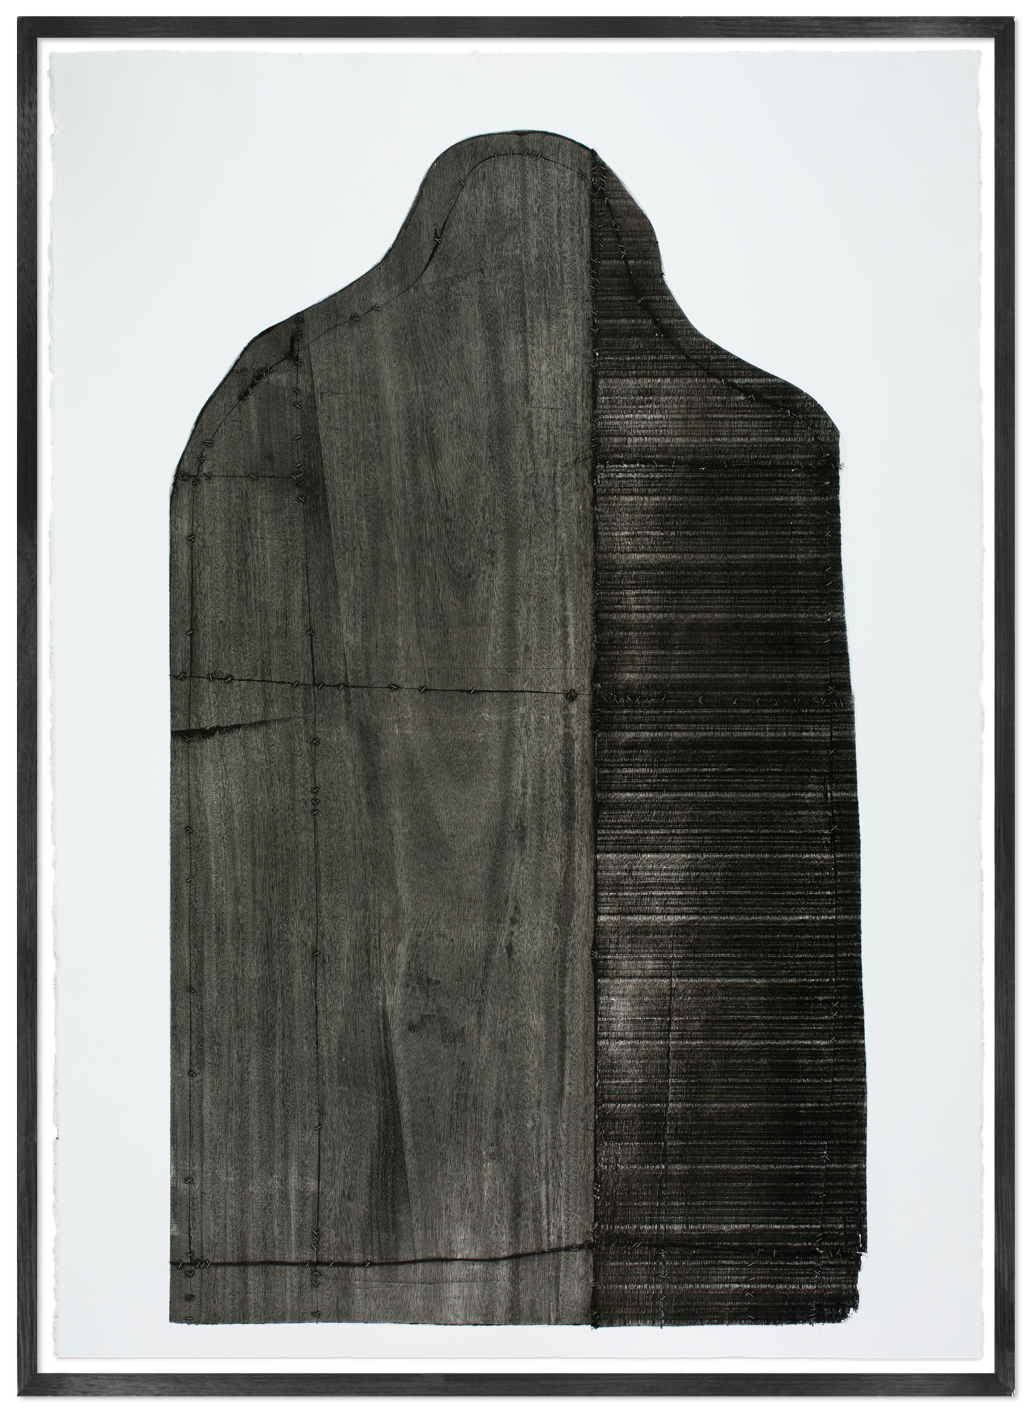 fine art print image of greyscaled form with wood texture by jacobo castellano